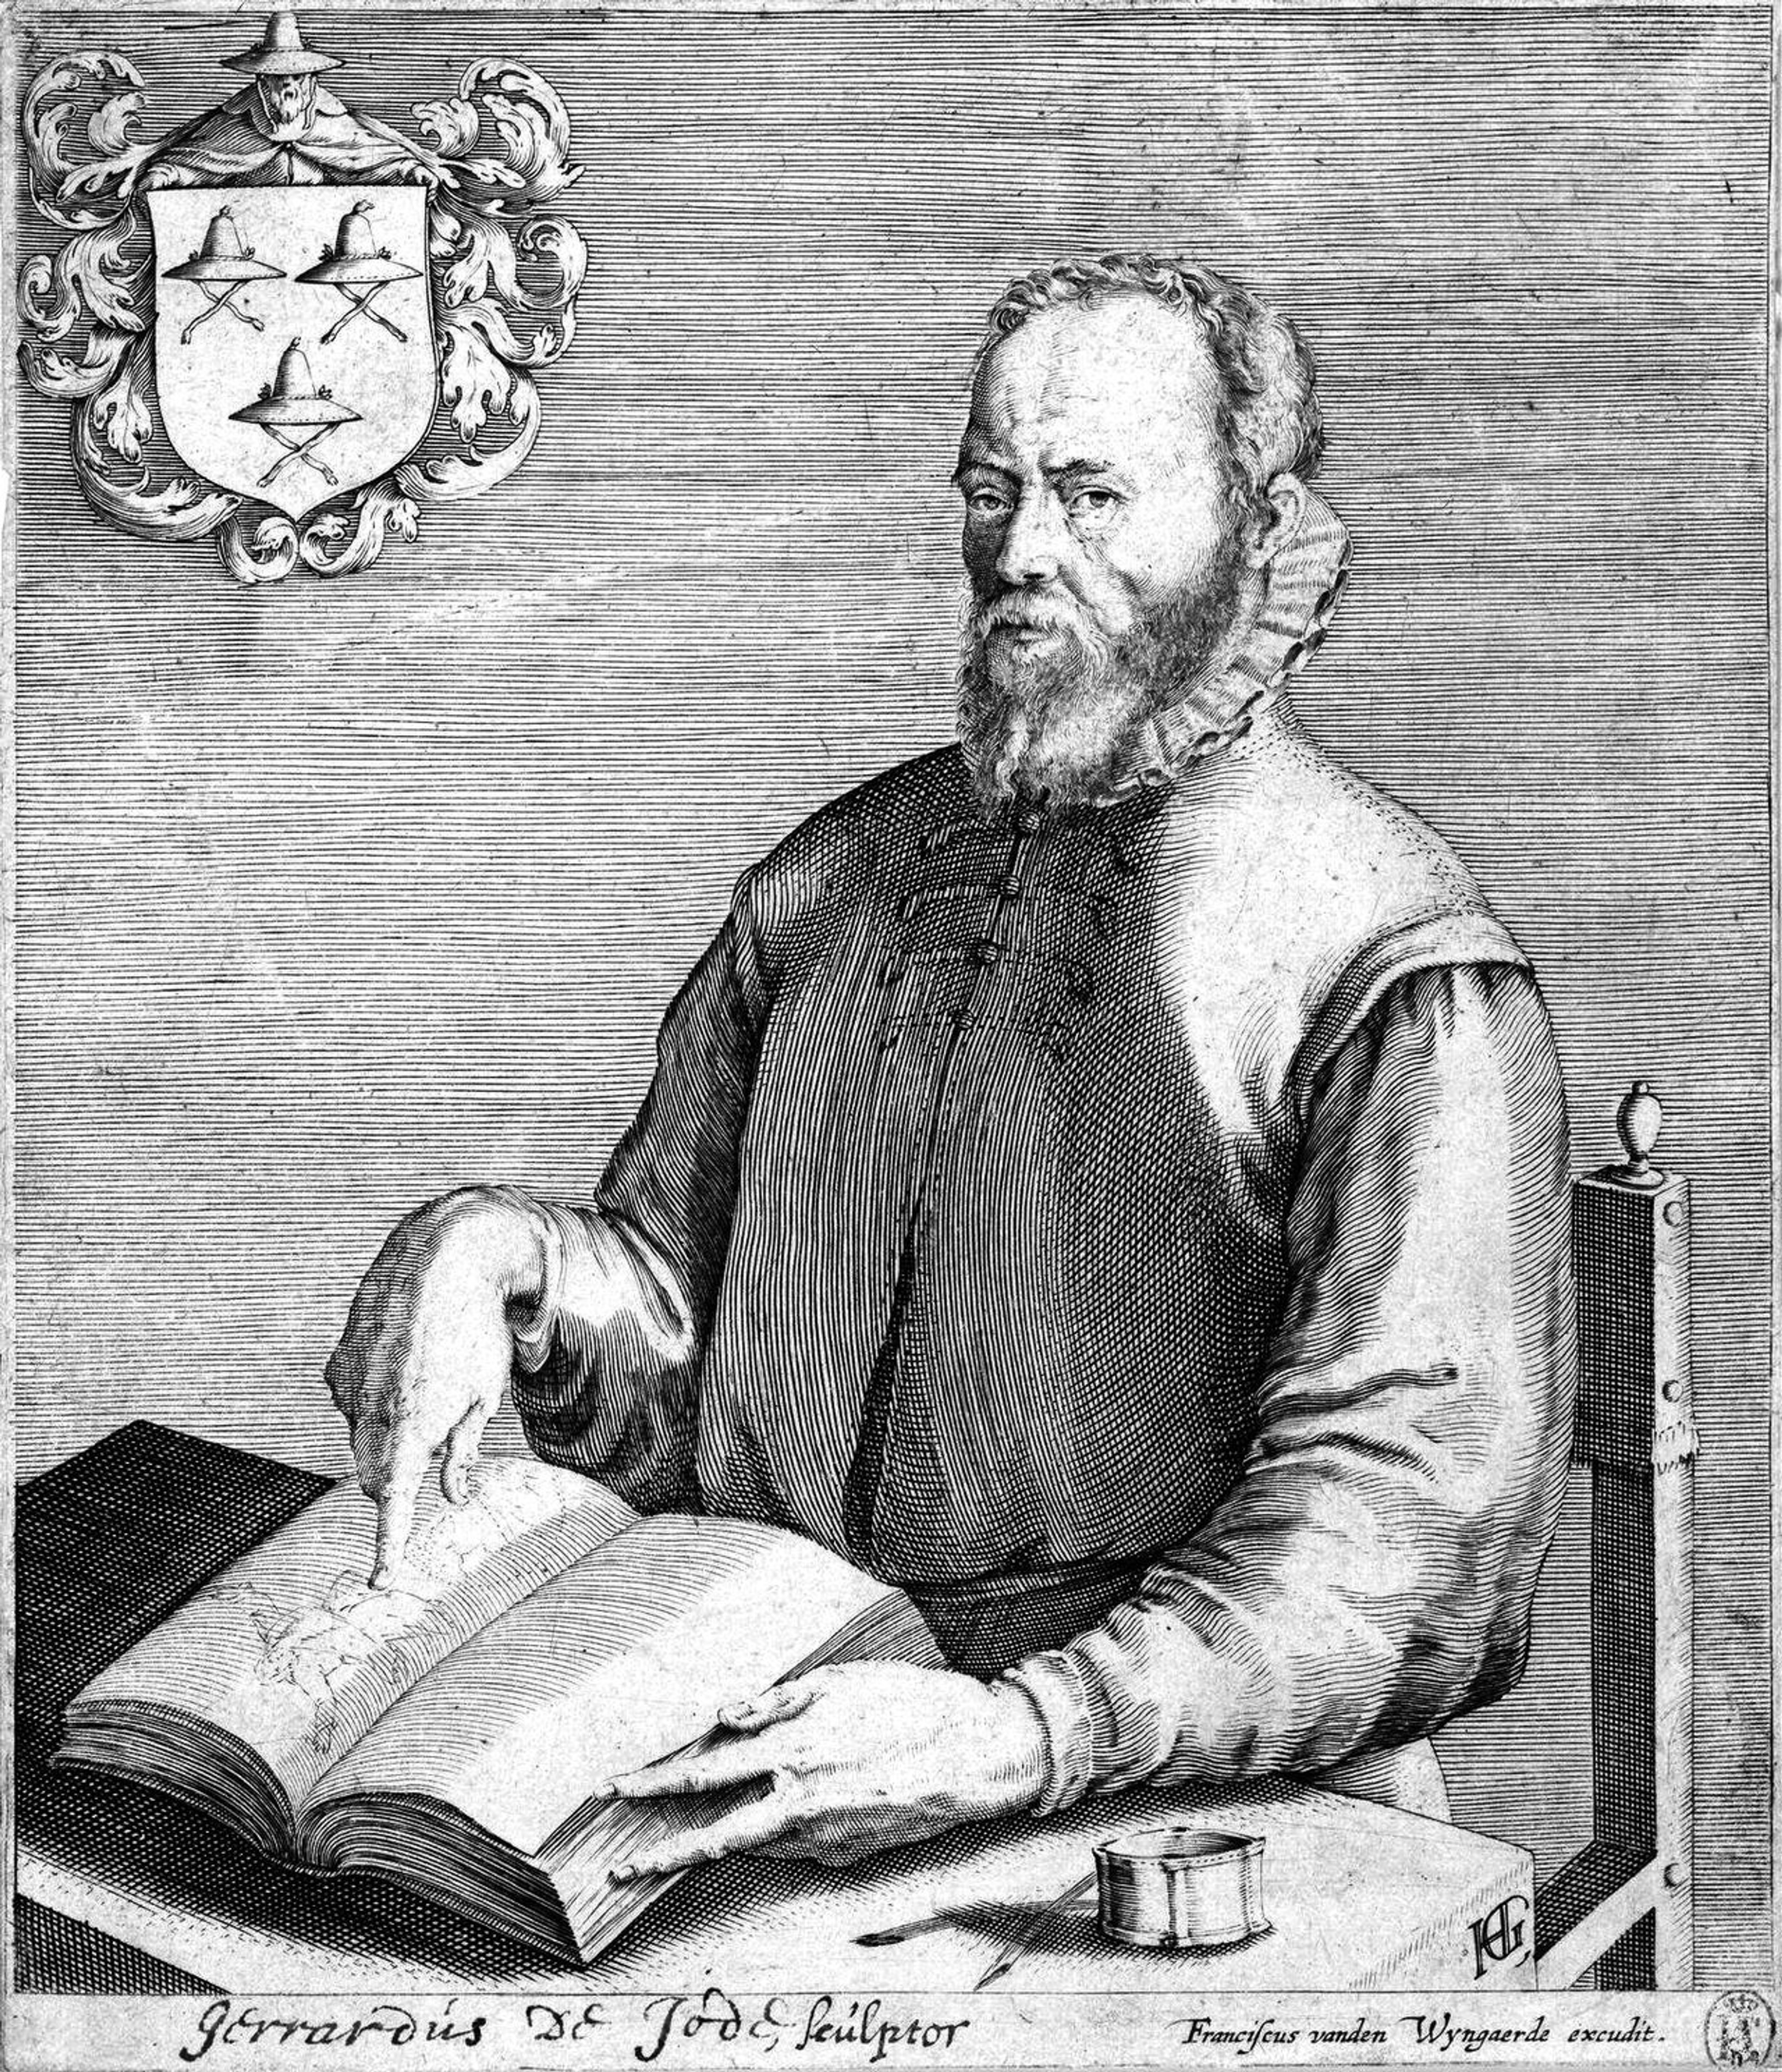 Black and white upper body portrait of Gerard de Jode, a man with short hair and a beard. He is gesturing towards a page in a book, and there is a coat of arms on the wall behind him.